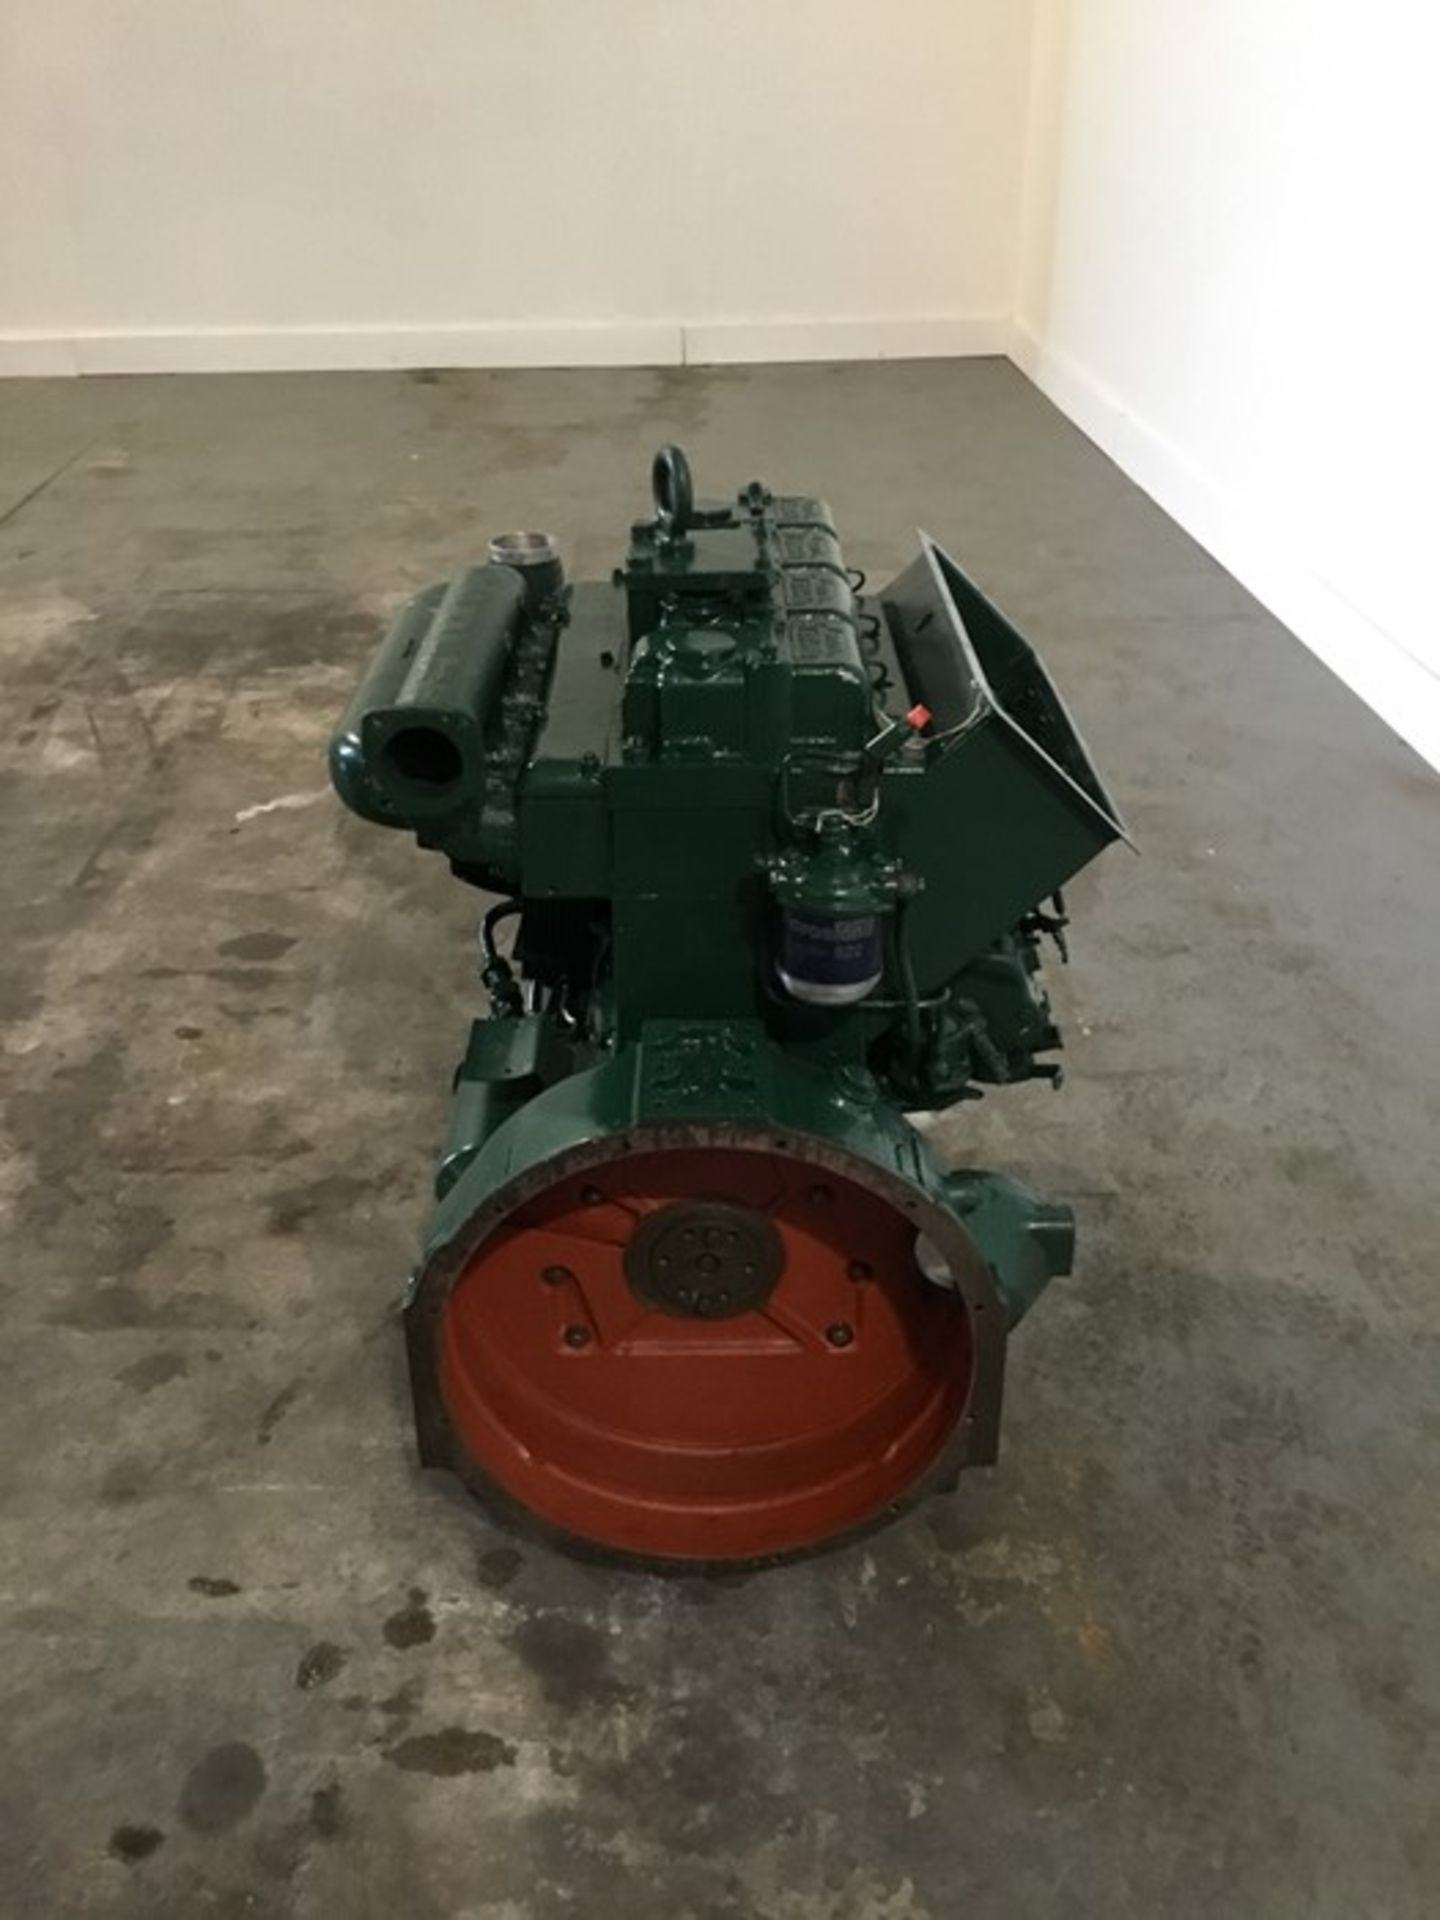 Lister 4cyl Diesel Engine: Lister 4cyl non turbo low hours - Image 16 of 18